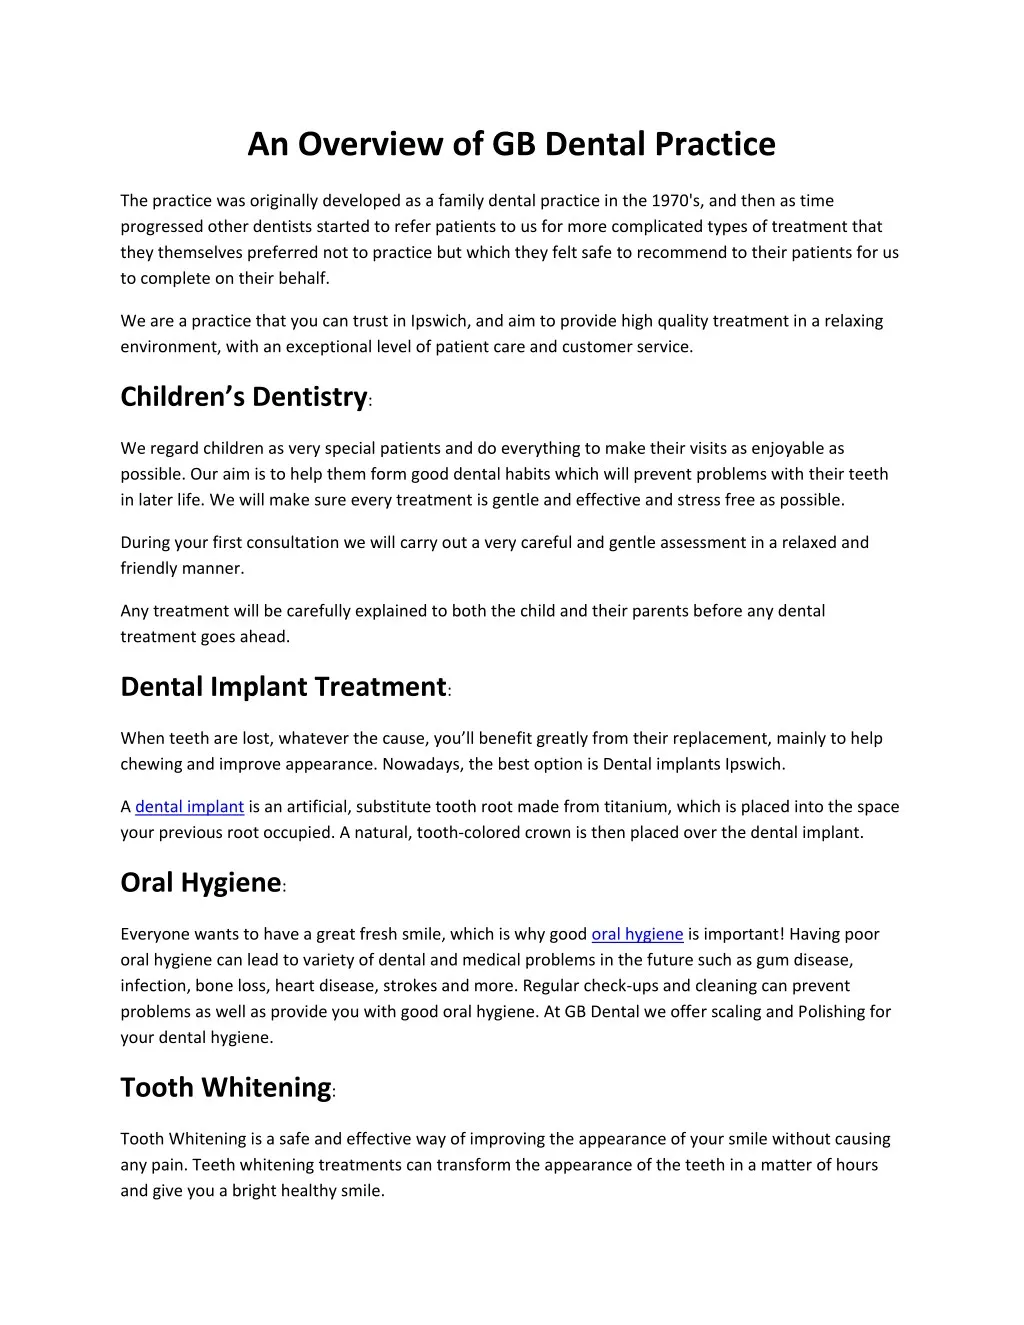 an overview of gb dental practice